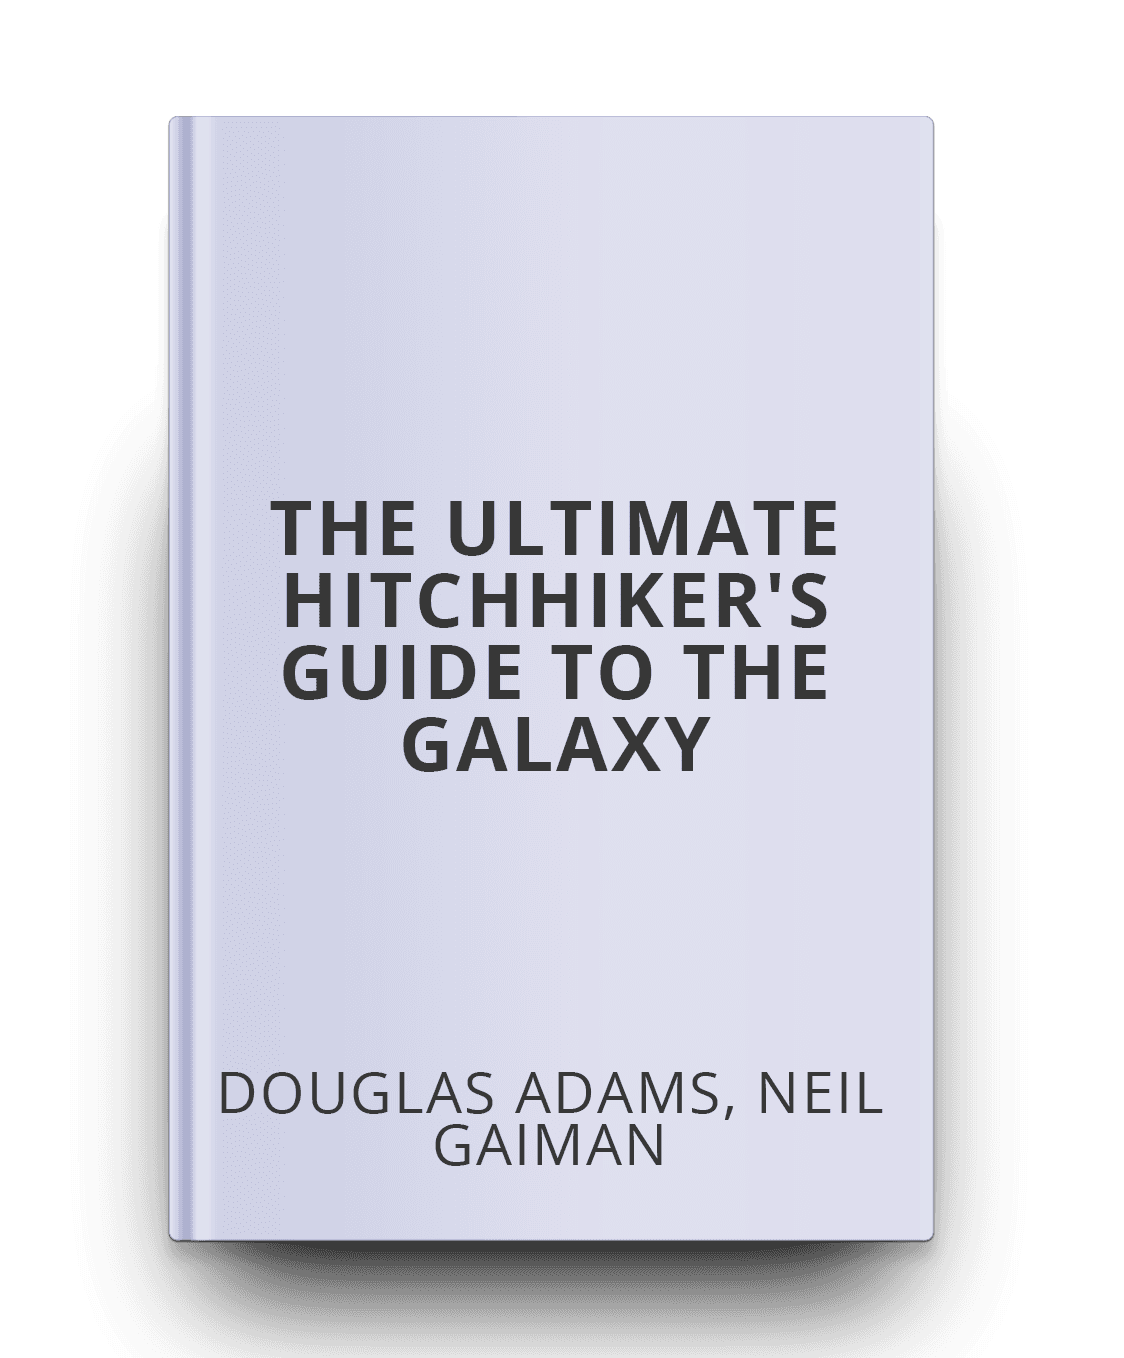 the-ultimate-hitchhikers-guide-to-the-galaxy